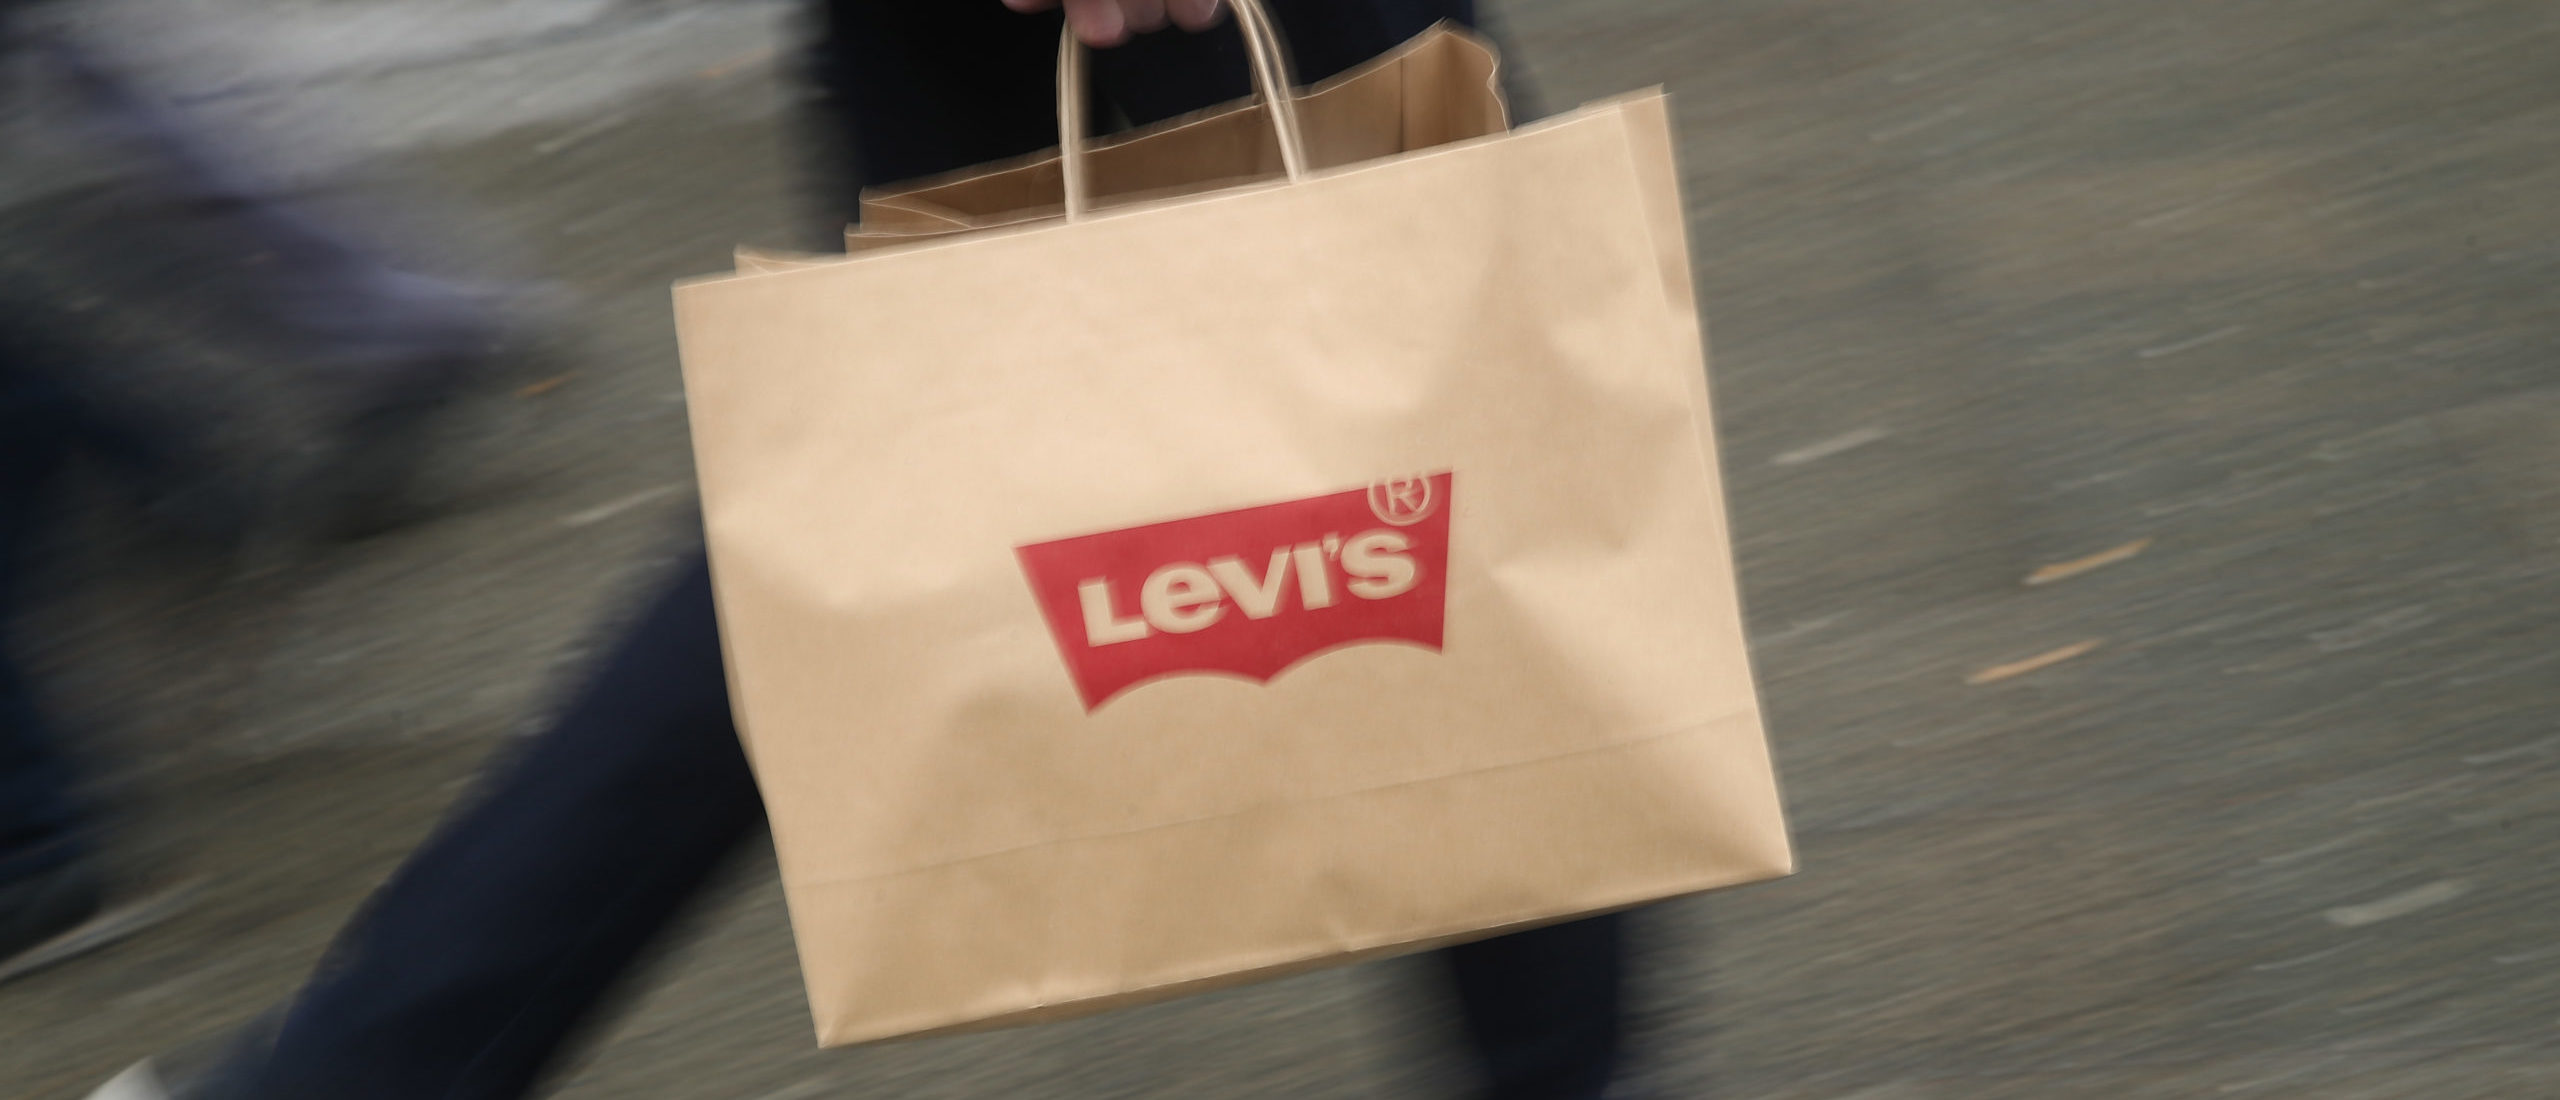 BERLIN, GERMANY - MARCH 05: PA man carries a shopping bag from a Levi's jeans and clothing store on March 5, 2018 in Berlin, Germany. Tensions between U.S. President Donald Trump and the European Union are rising after Trump announced he would respond to any E.U. tariffs on American goods with U.S. tariffs on European cars. Trump originally sought tariffs on imports of steel and aluminum, to which EU officials said they would respond with tariffs on U.S. bourbon, Levi's jeans and Harley-Davidson motorcycles. The European Union and Canada are the two biggest exporters of steel to the United States. (Photo by Sean Gallup/Getty Images)